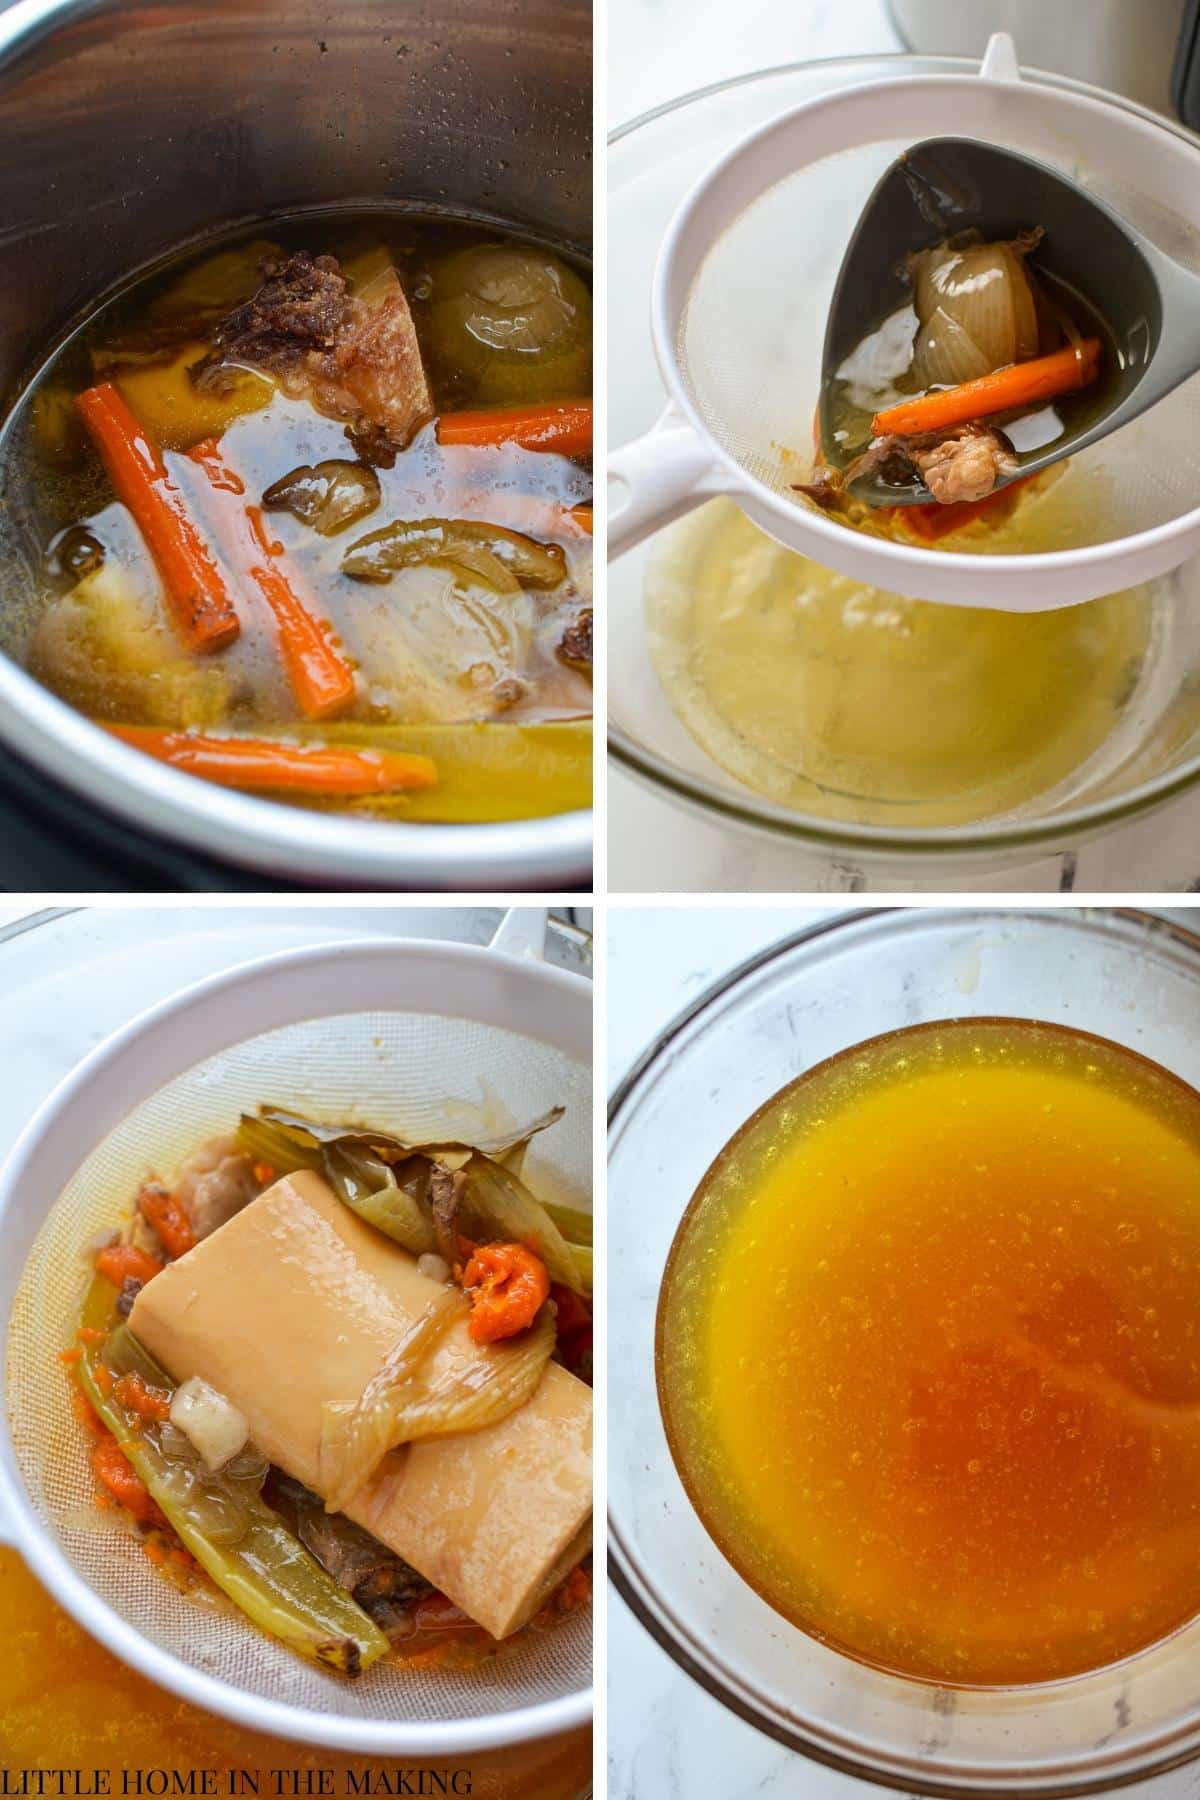 Straining beef broth of veggies and bones to get a clear liquid.